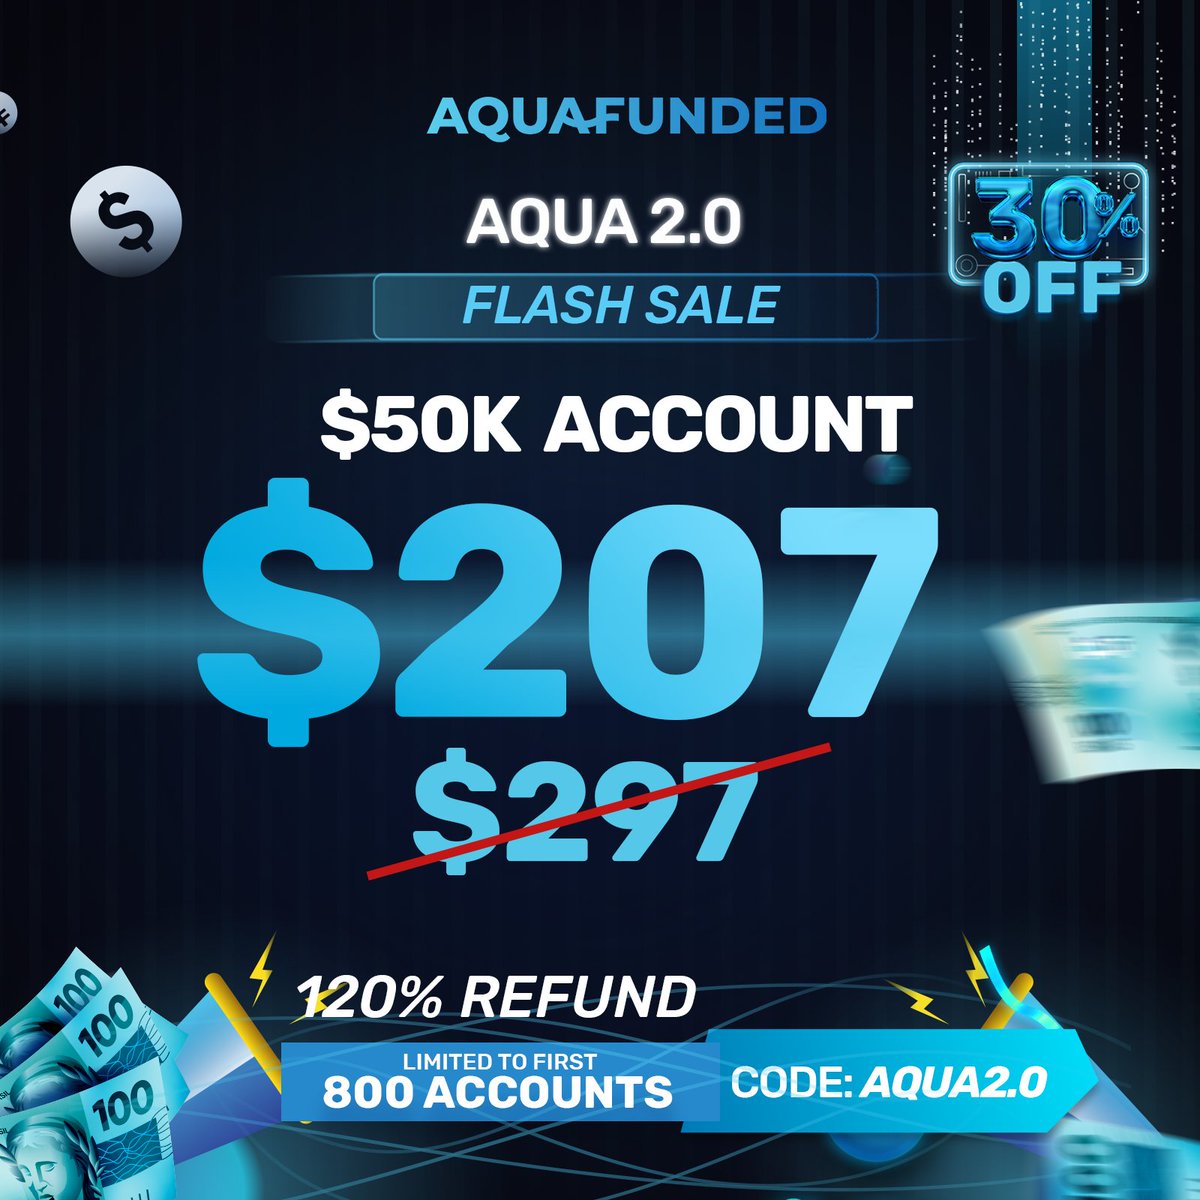 $50k ACCOUNT FOR ONLY $207 🥶 aquafunded.com/?el=x Limited Time SALE! ⏳ Exclusive 30% OFF Discount 💙 120% Refund 💙 90% Profit Split